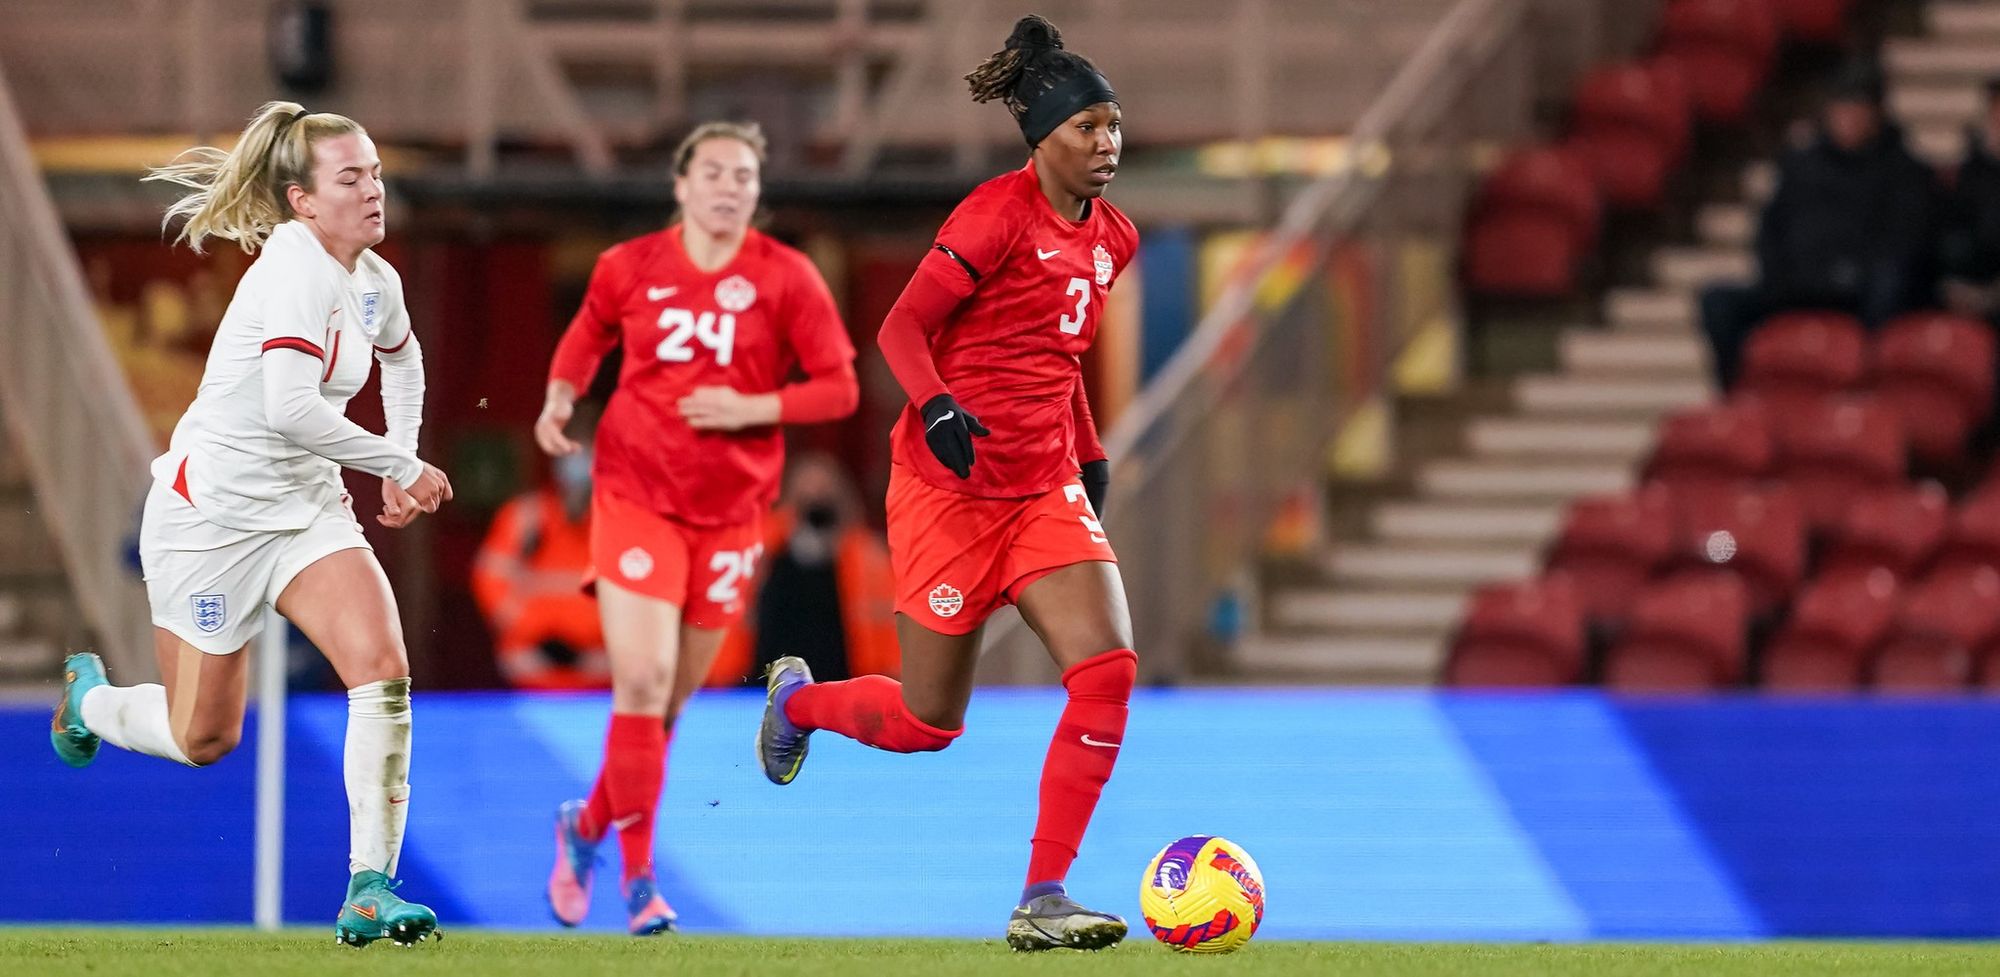 Buchanan returns, Gilles missing from latest Canadian roster